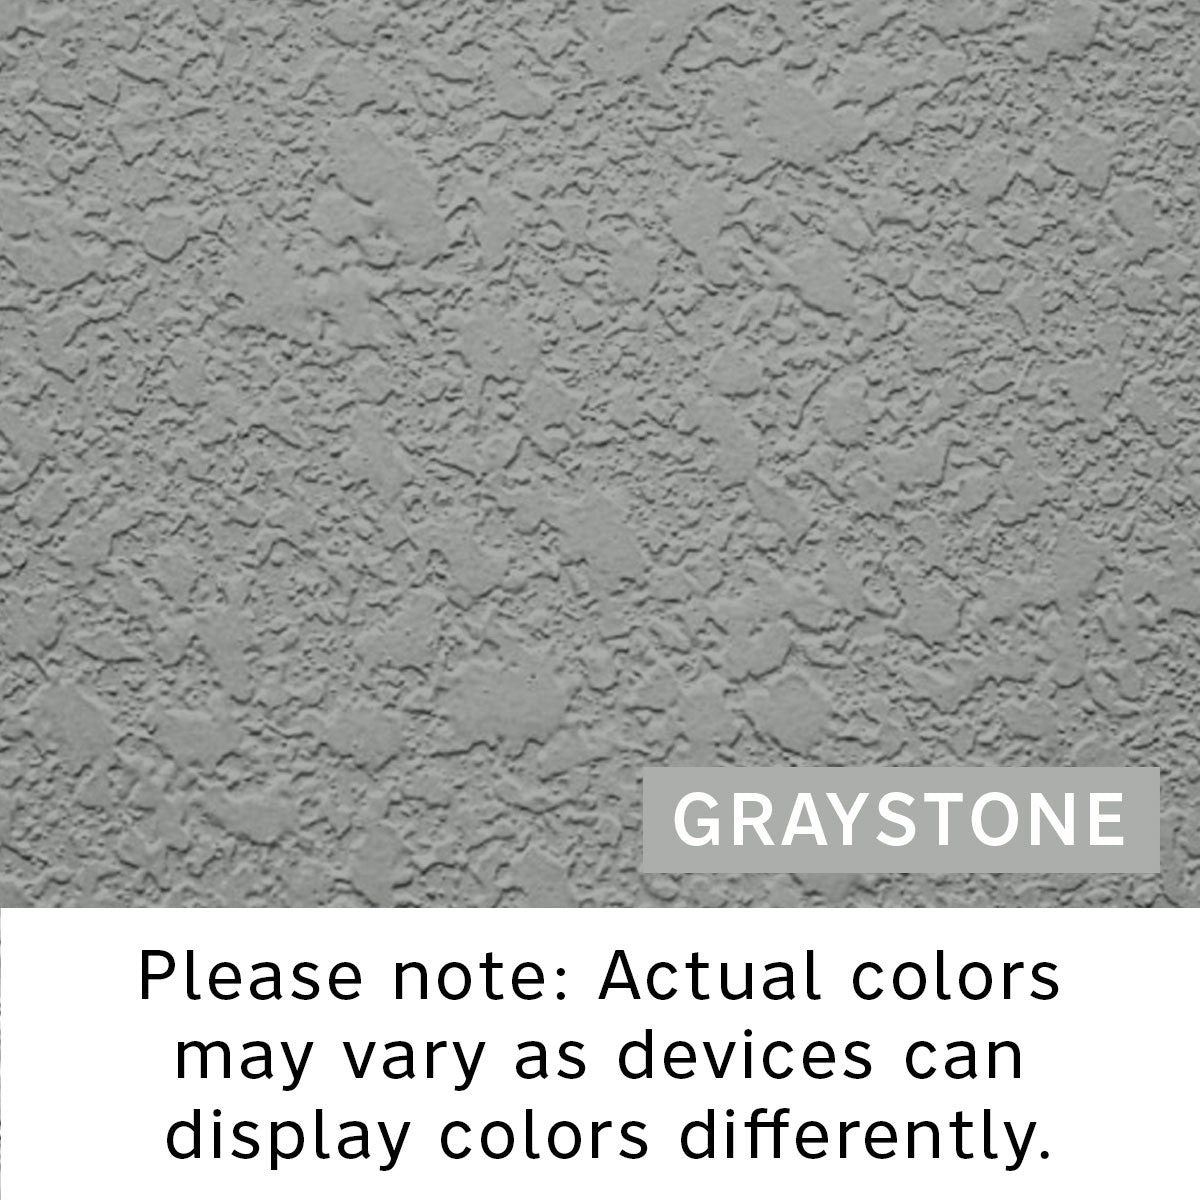 Textured color swatch for Graystone